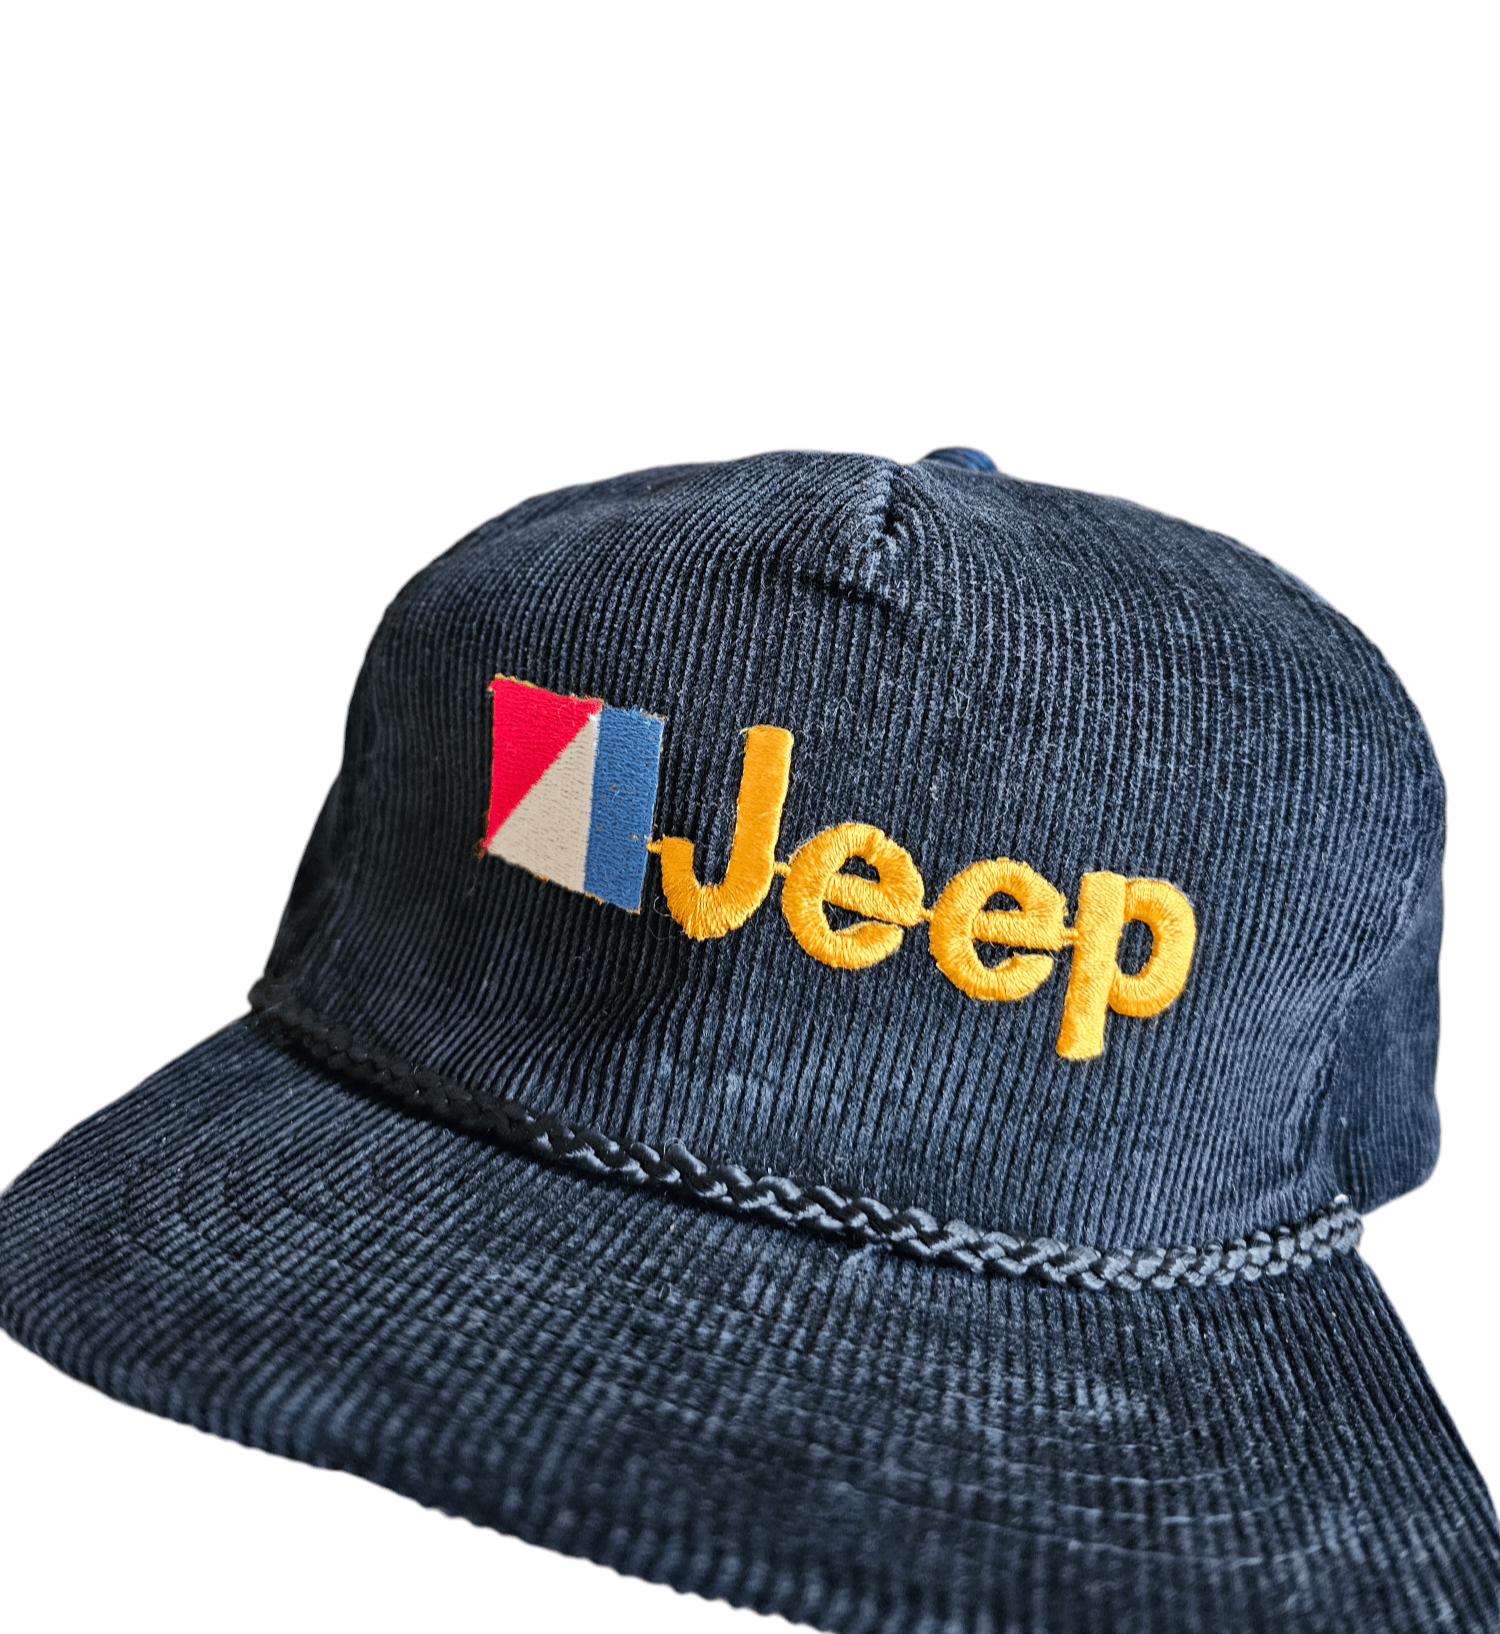 Vintage Vintage 90s/80s Jeep Corduroy Rope Hat Size ONE SIZE - 2 Preview